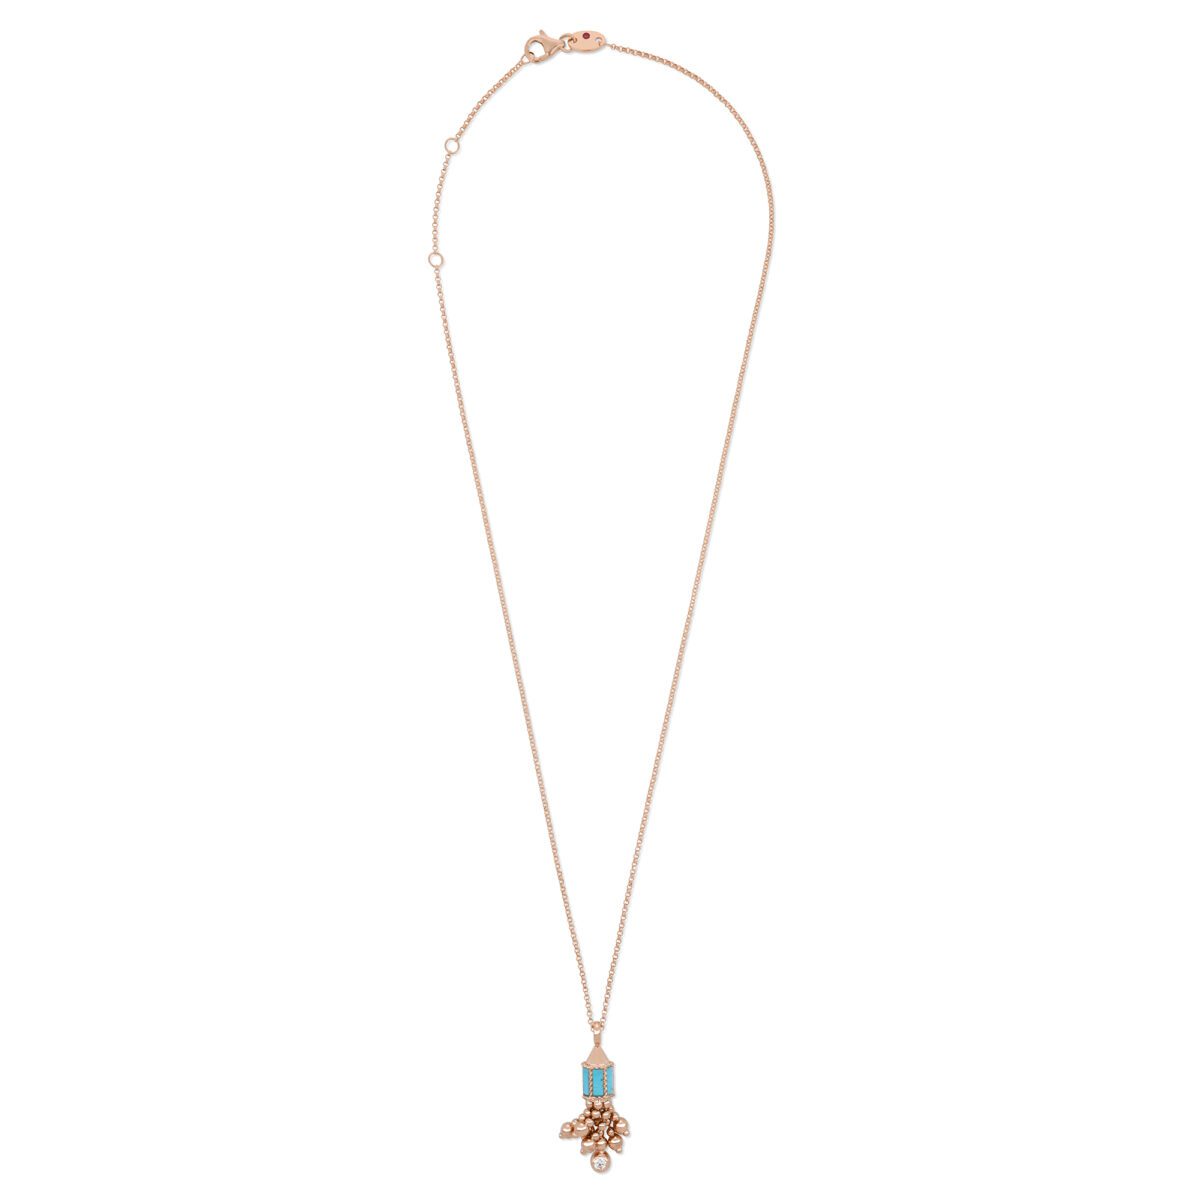 ROBERTO-COIN-ART-DECO-TASSEL-NECKLACE-18KT-ROSE-GOLD-WITH-TURQUOISE-AND-DIAMONDS-MINI-VERSION_ADV888CL2267_03_ENTIRE